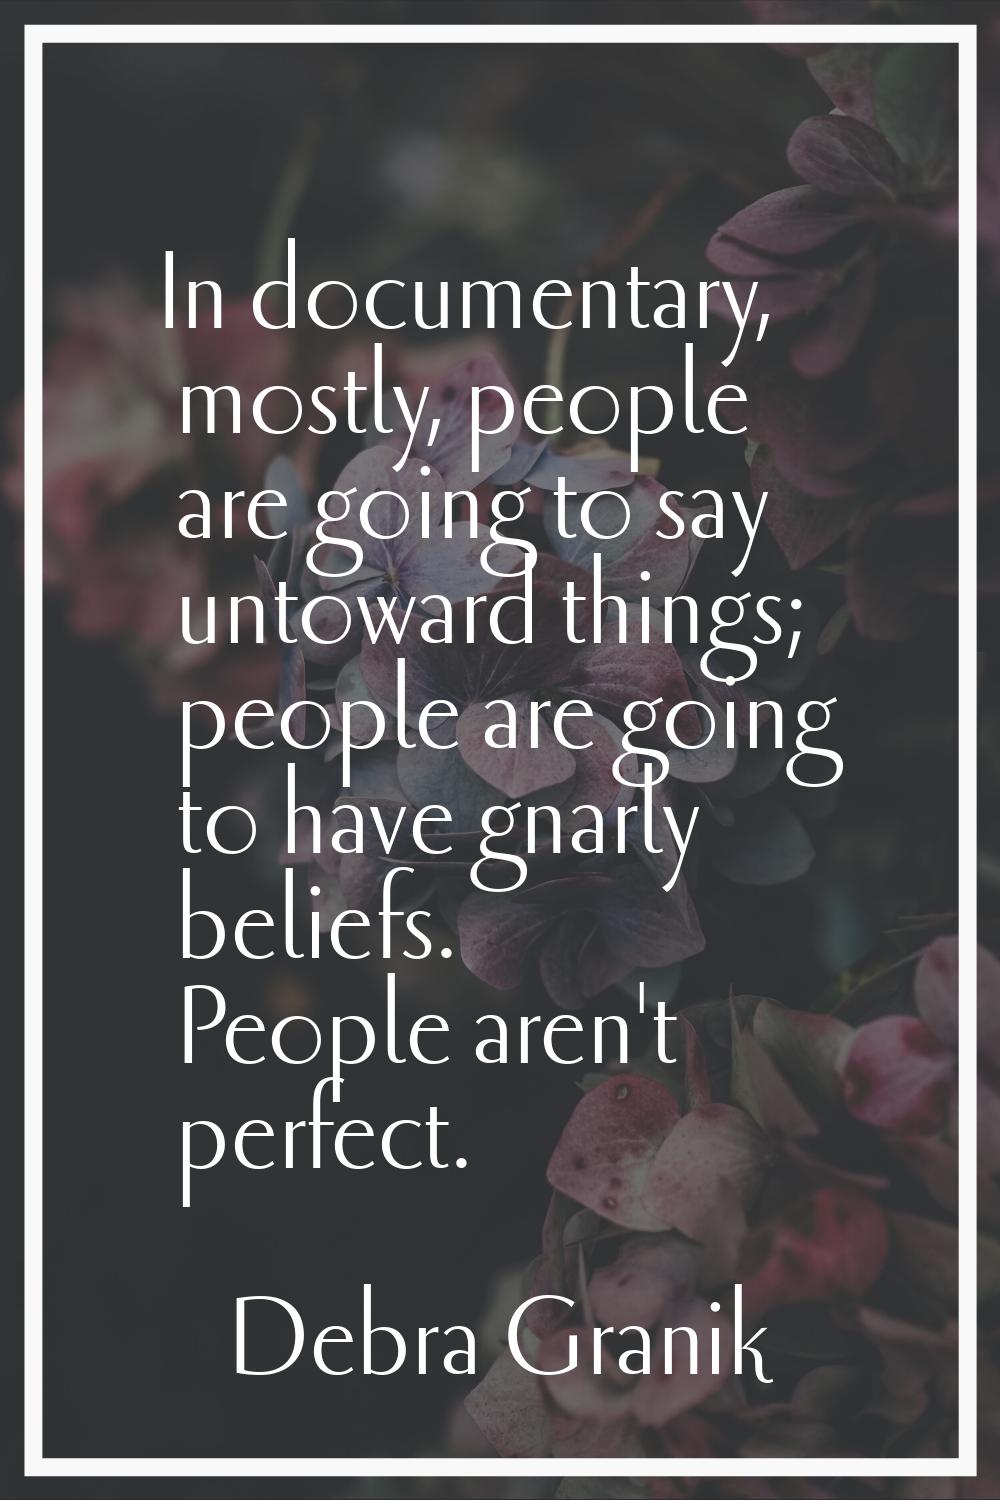 In documentary, mostly, people are going to say untoward things; people are going to have gnarly be